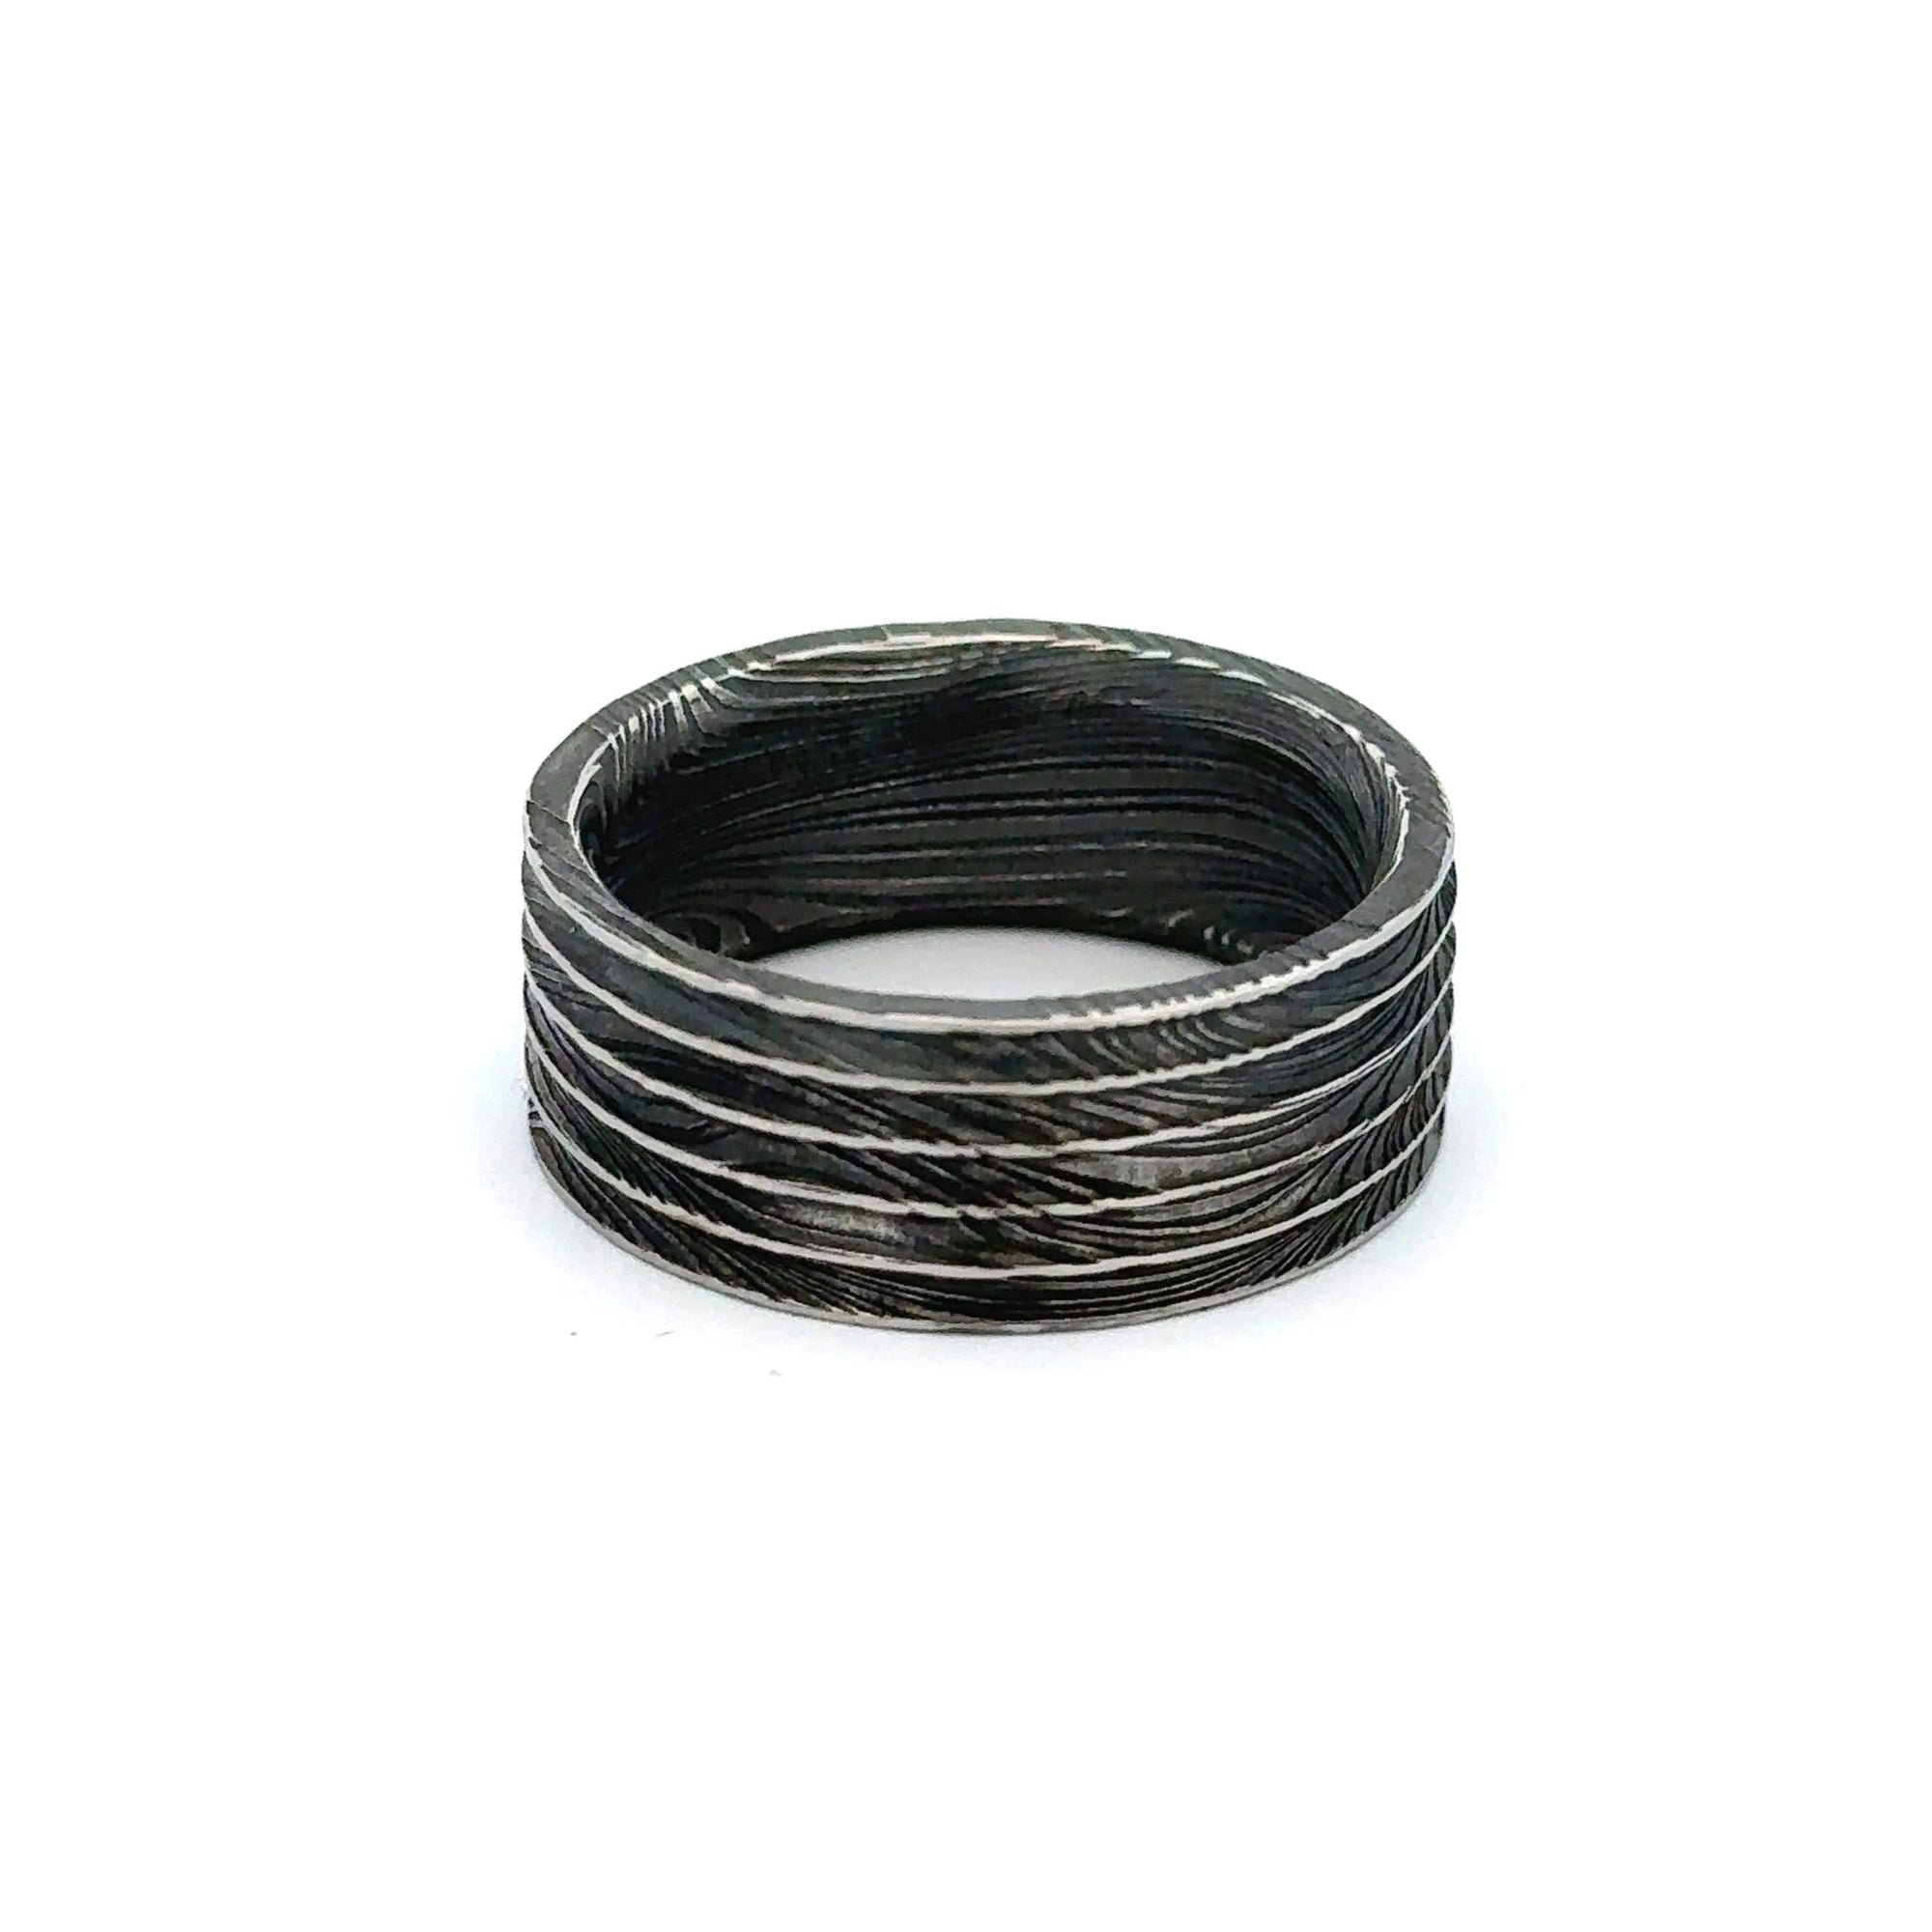 Damascus Steel grooved men's ring by Chris Ploof